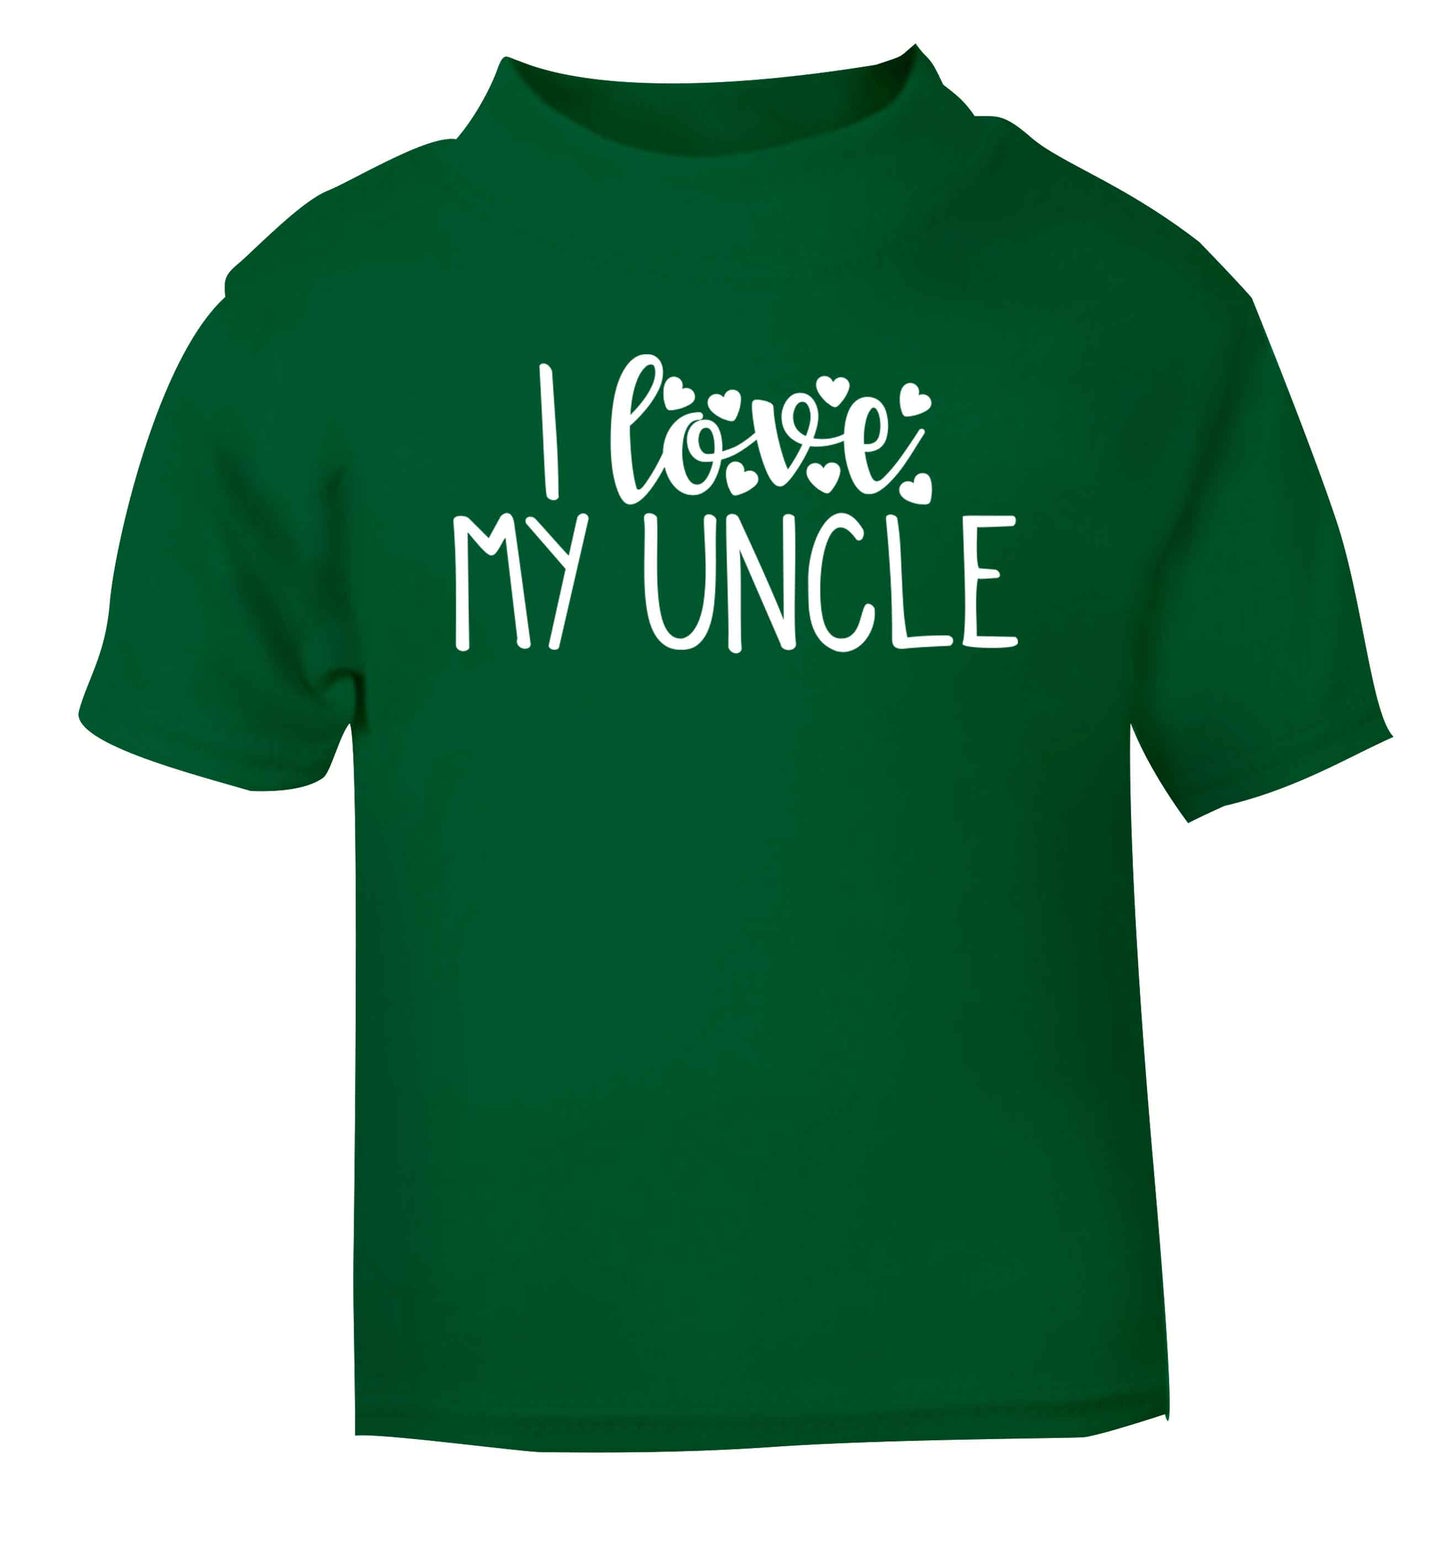 I love my uncle green Baby Toddler Tshirt 2 Years